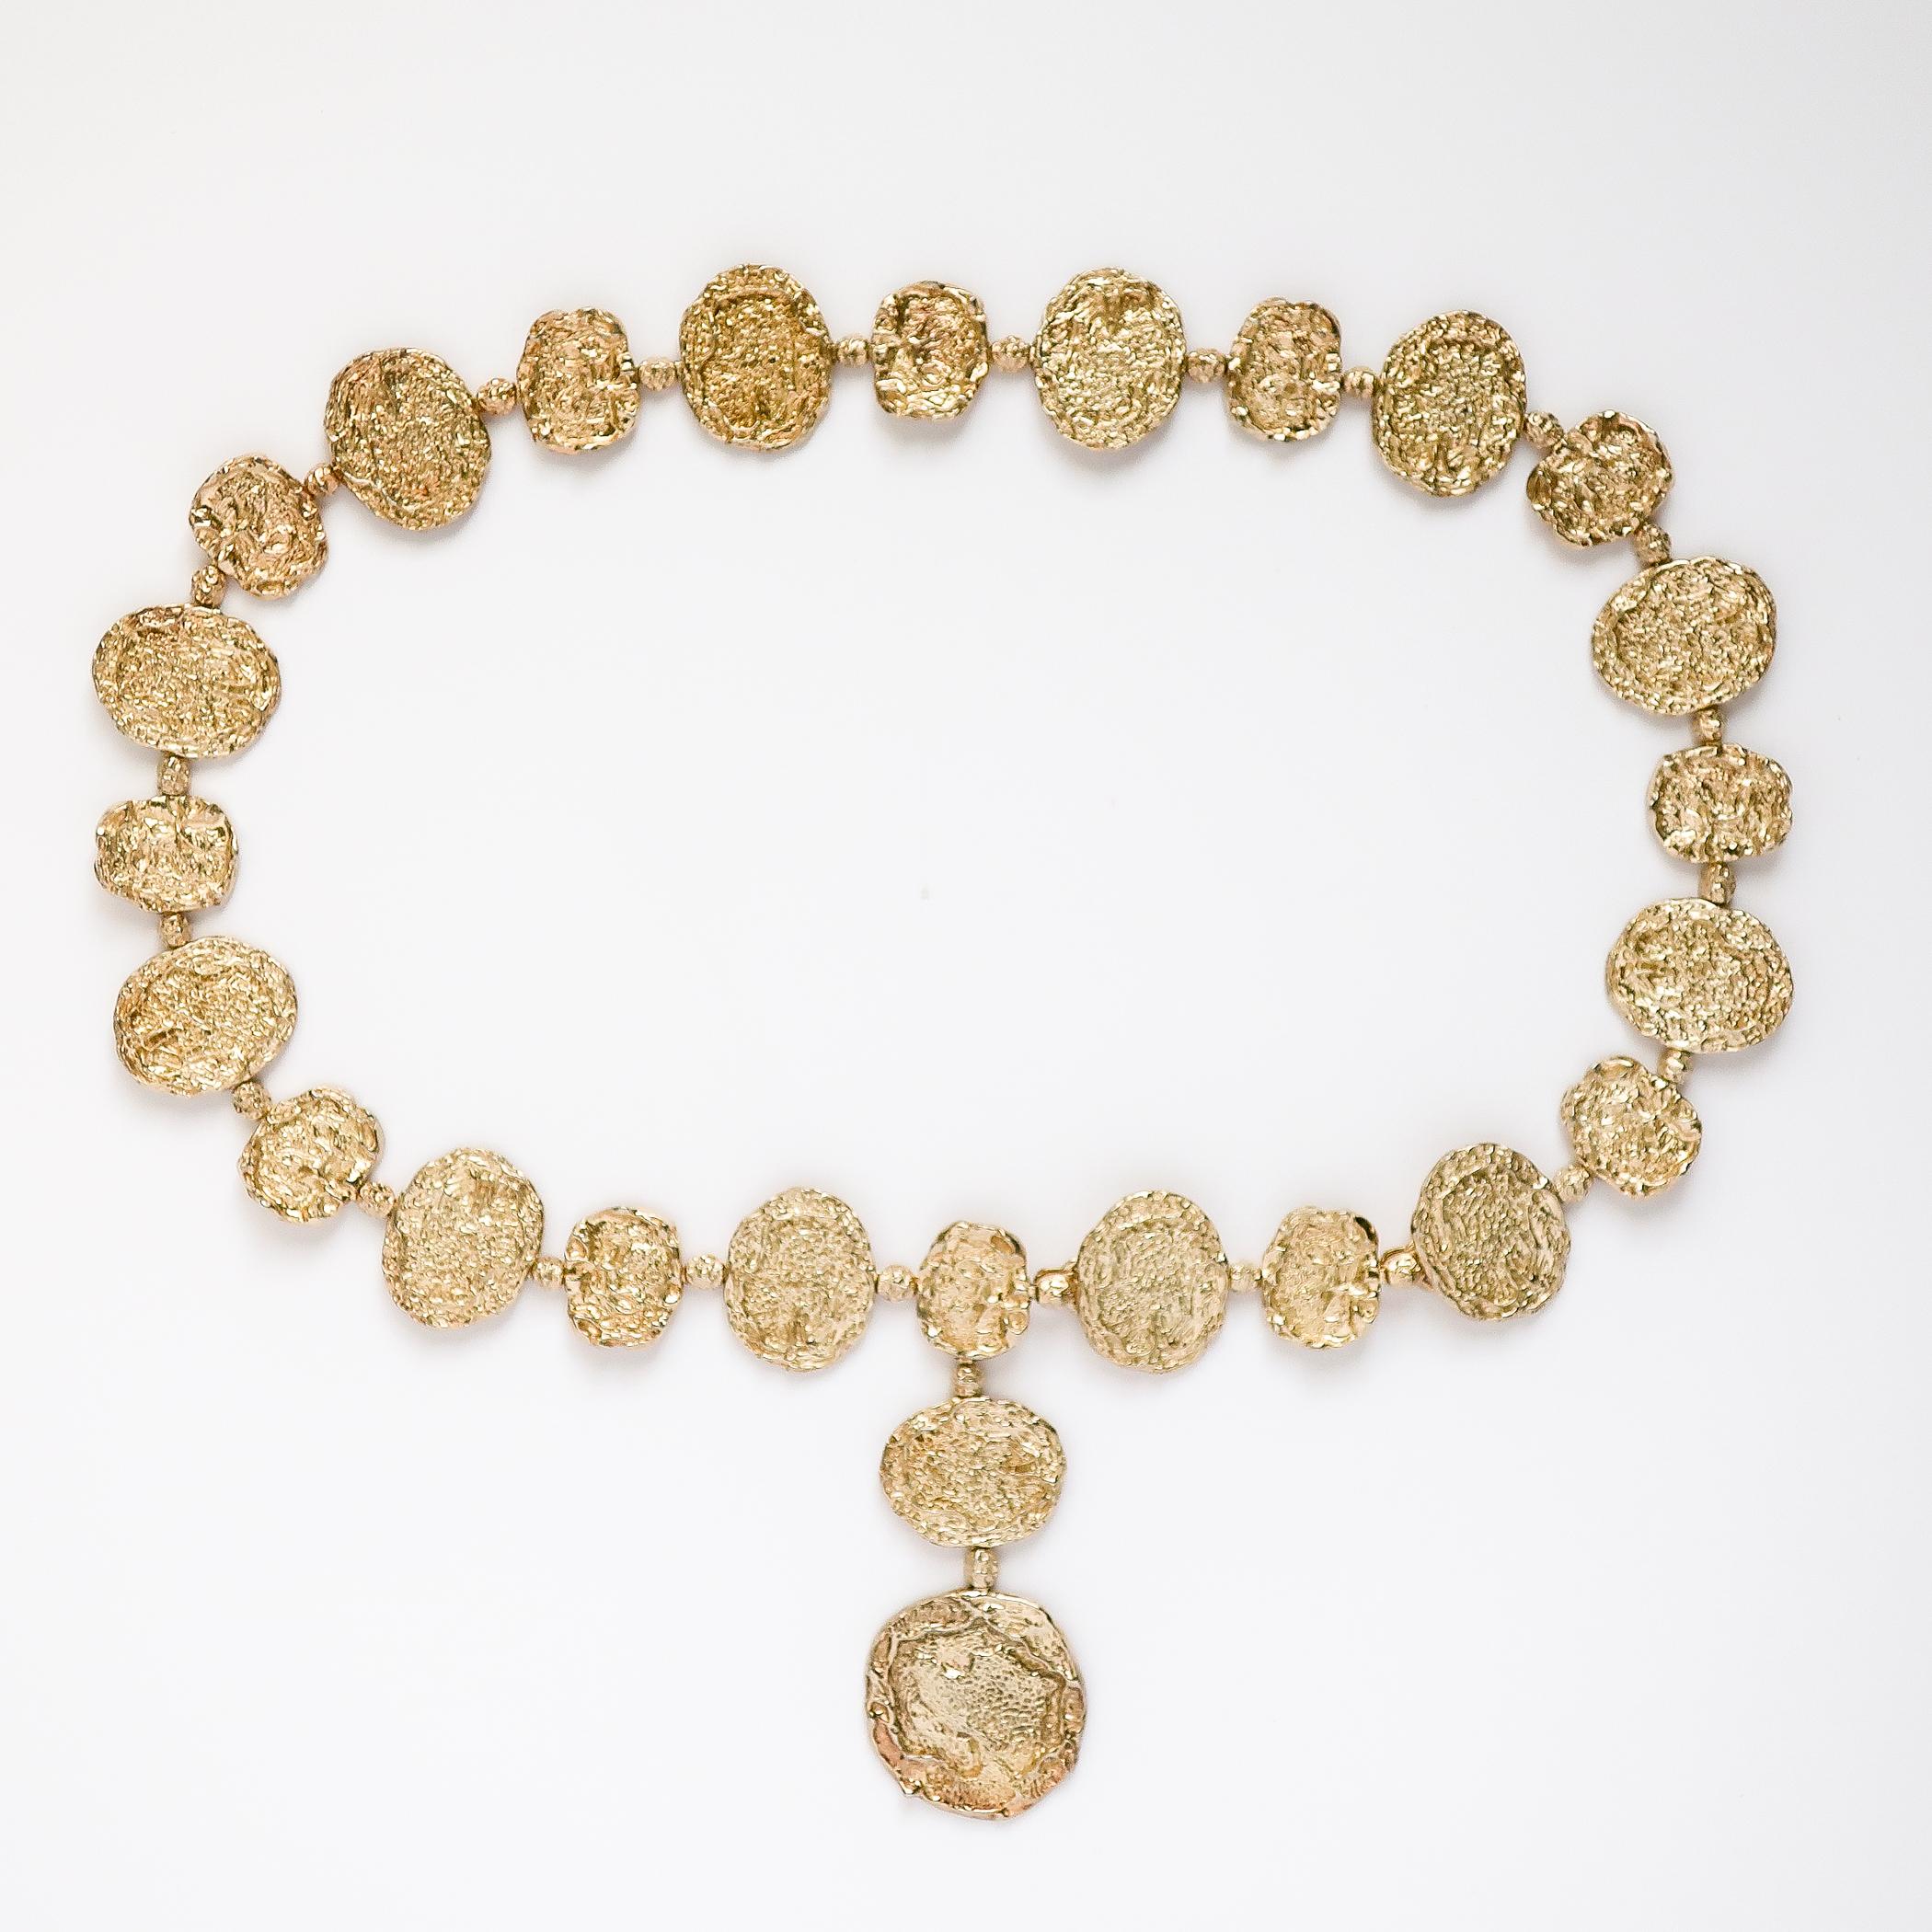 Cartier Vermeil Belt Necklace, Gold on Sterling Silver Jackie O, 1970s Brutalist In Good Condition For Sale In Raleigh, NC